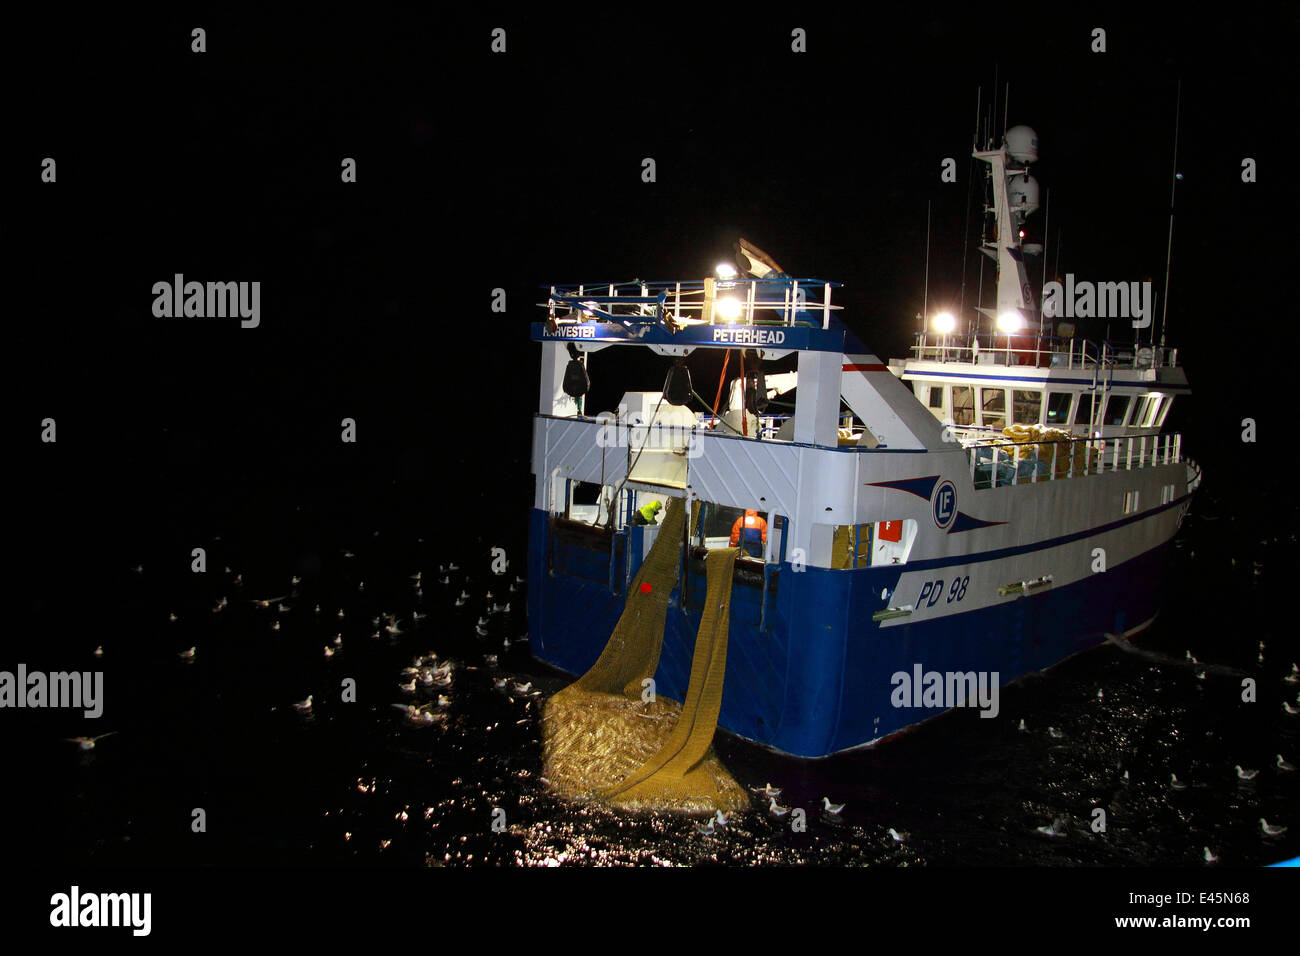 Fishing vessel Harvester taking a good haul of Saithe (Pollachius virens) aboard at night on the North Sea. February 2010. Property released. Stock Photo